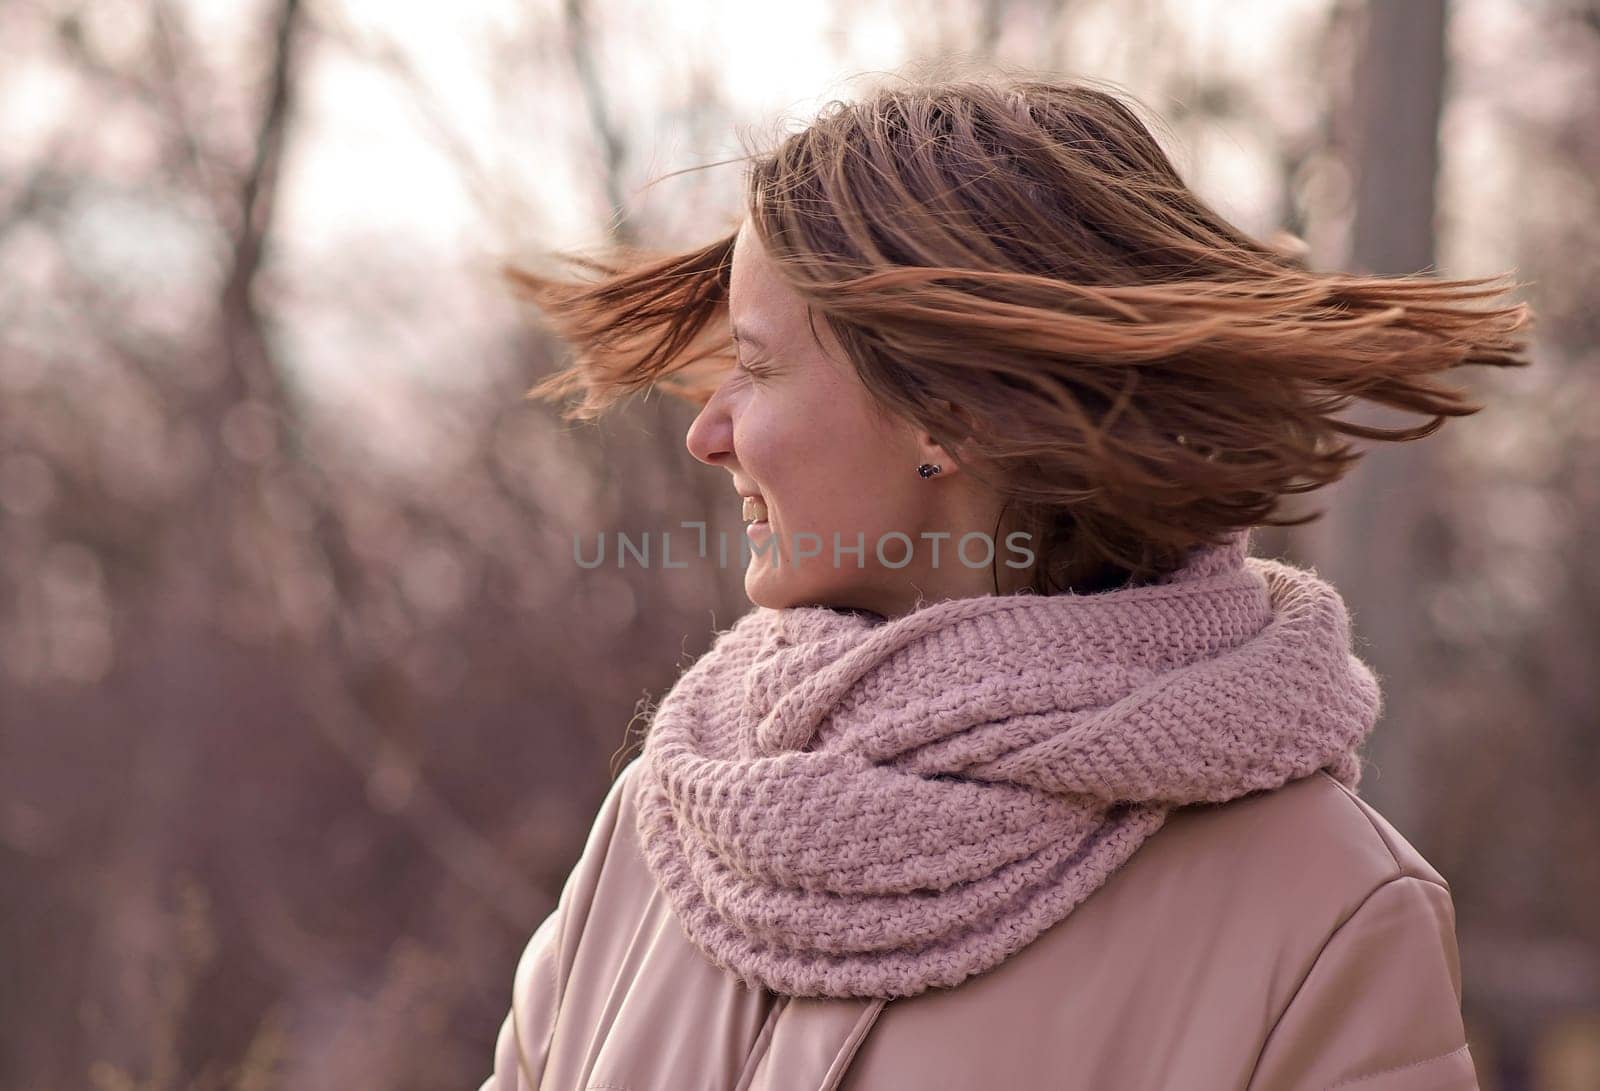 candid attractive young smiling woman walking in autumn park, happy mood, fashion style trend, pink jacket, waving brown hair by aprilphoto